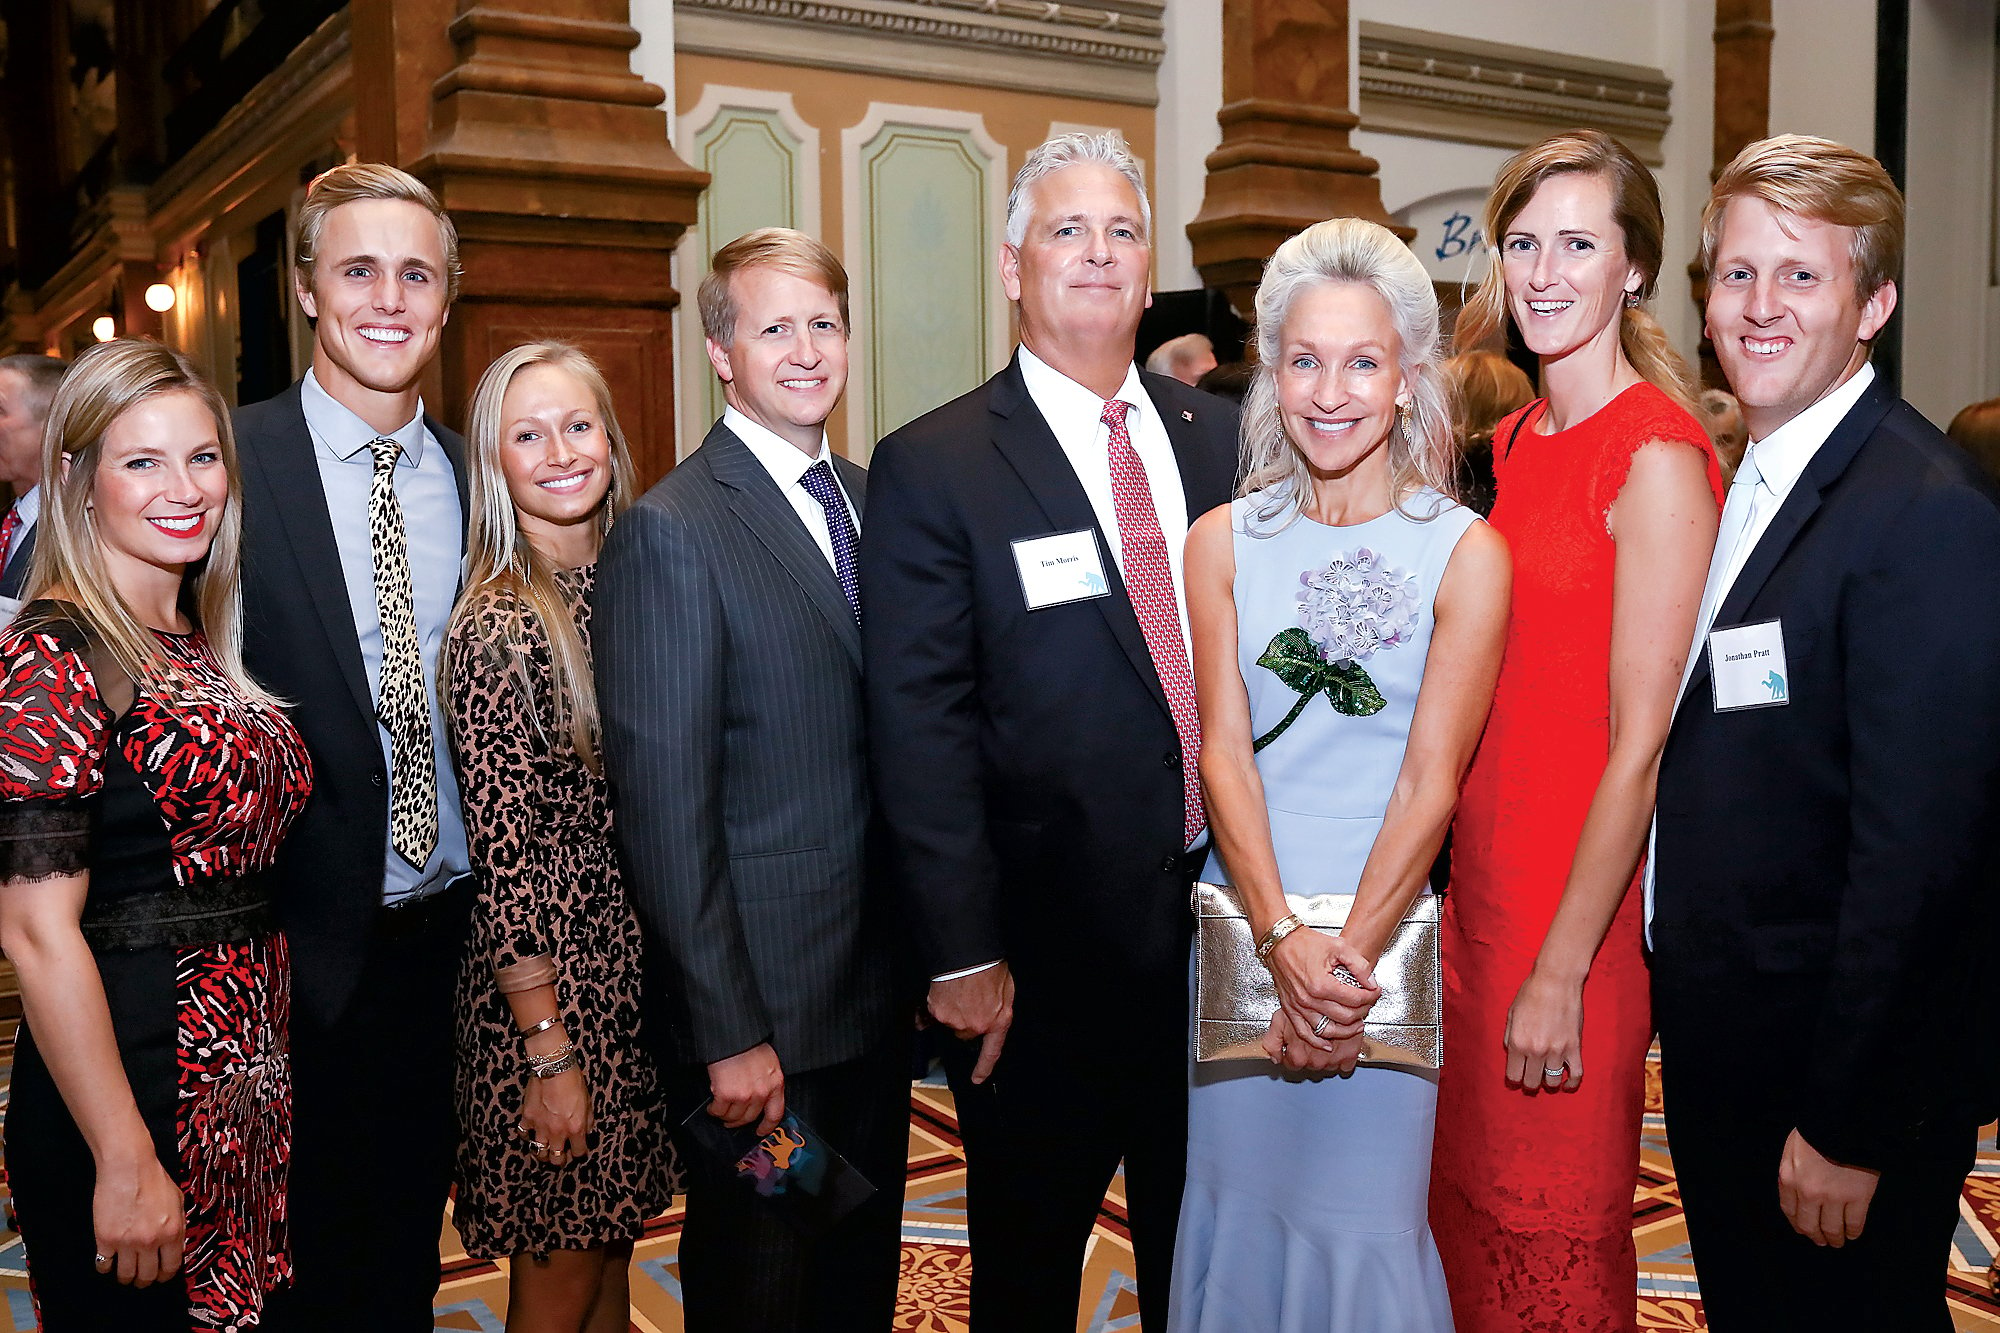 Angie, third from right, at a 2017 gala, remains part of the clan. Photograph by Washington Life Magazine/Tony Powell.